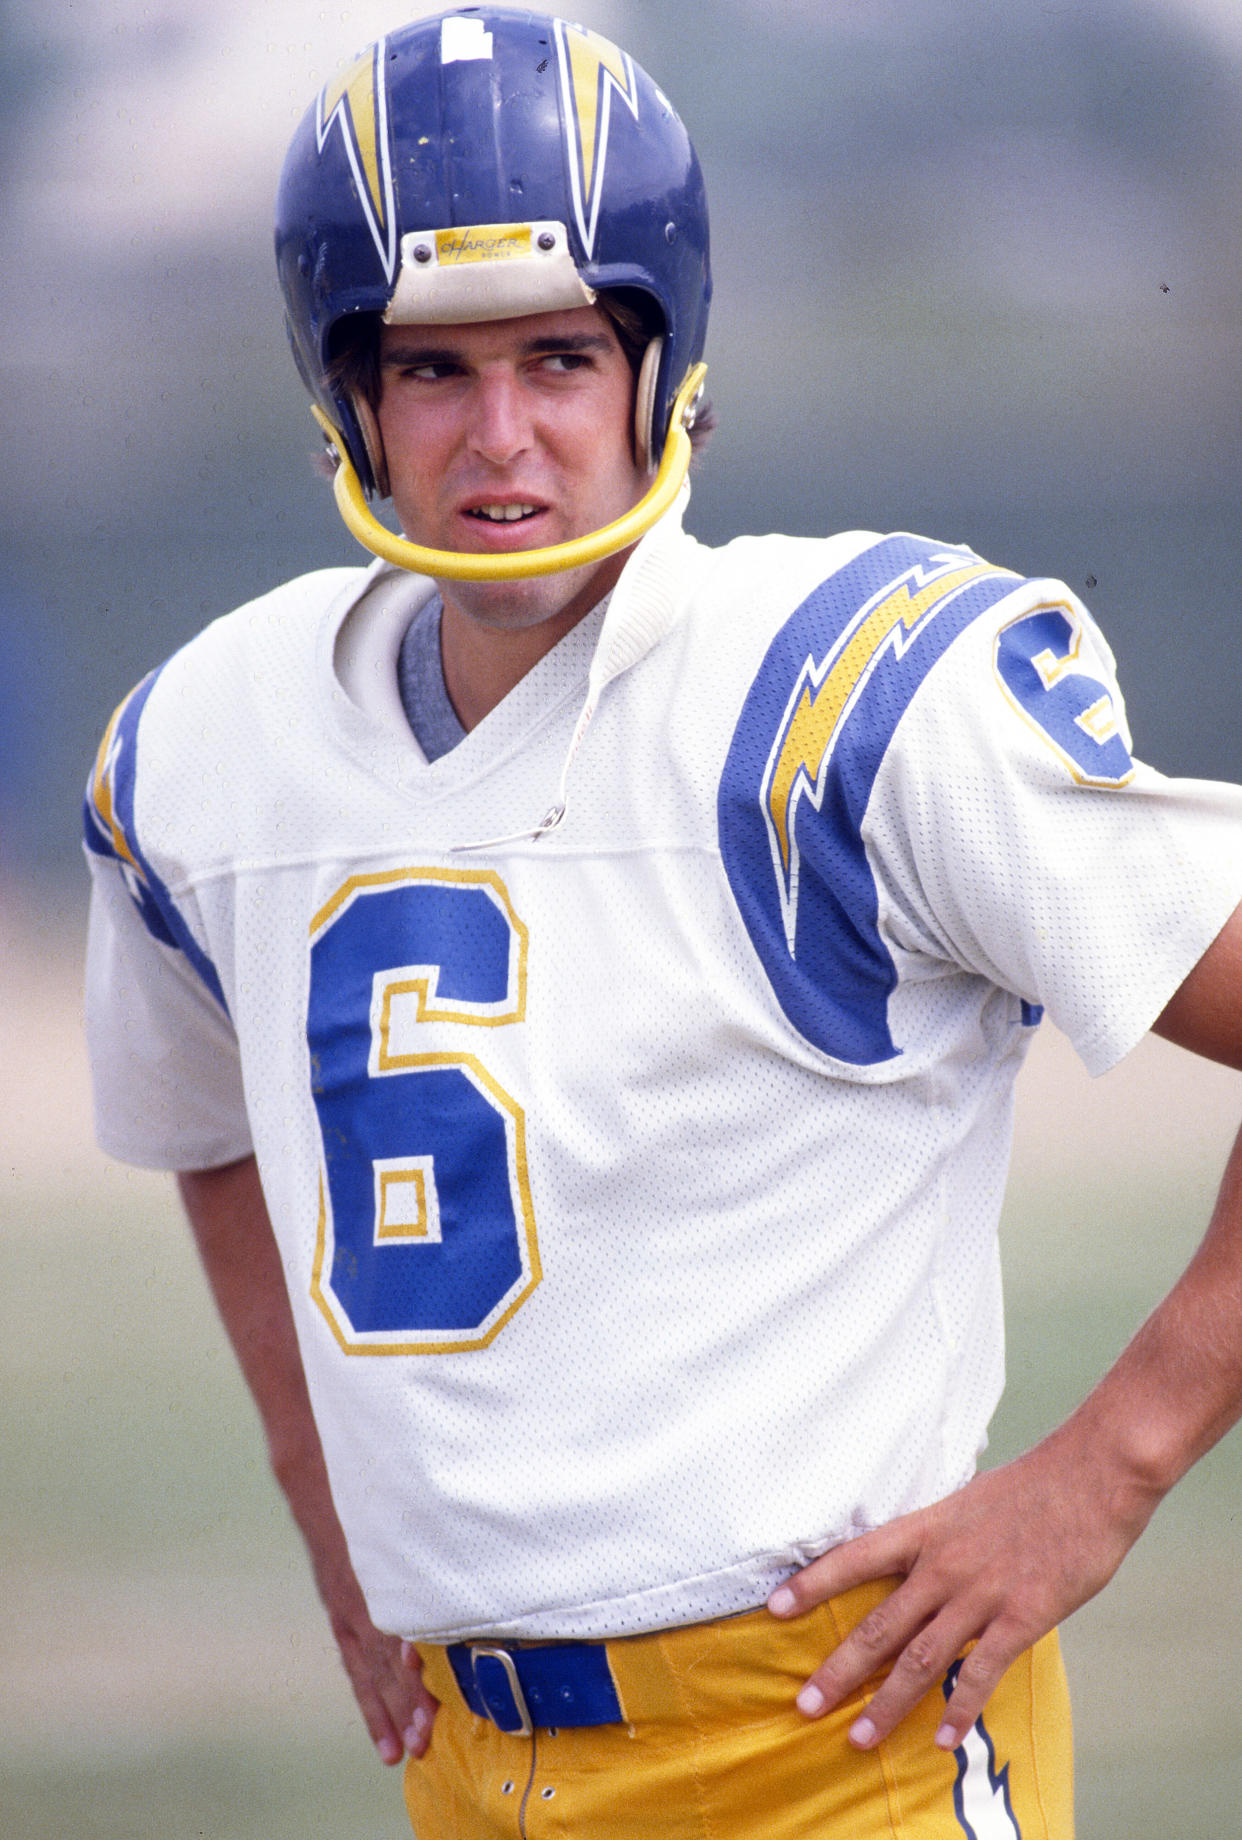 Rolf Benirschke #6 of the San Diego Chargers looks on during pregame warmups prior to the start of an NFL football game circa 1980 in San Diego. (Focus On Sport / Getty Images)